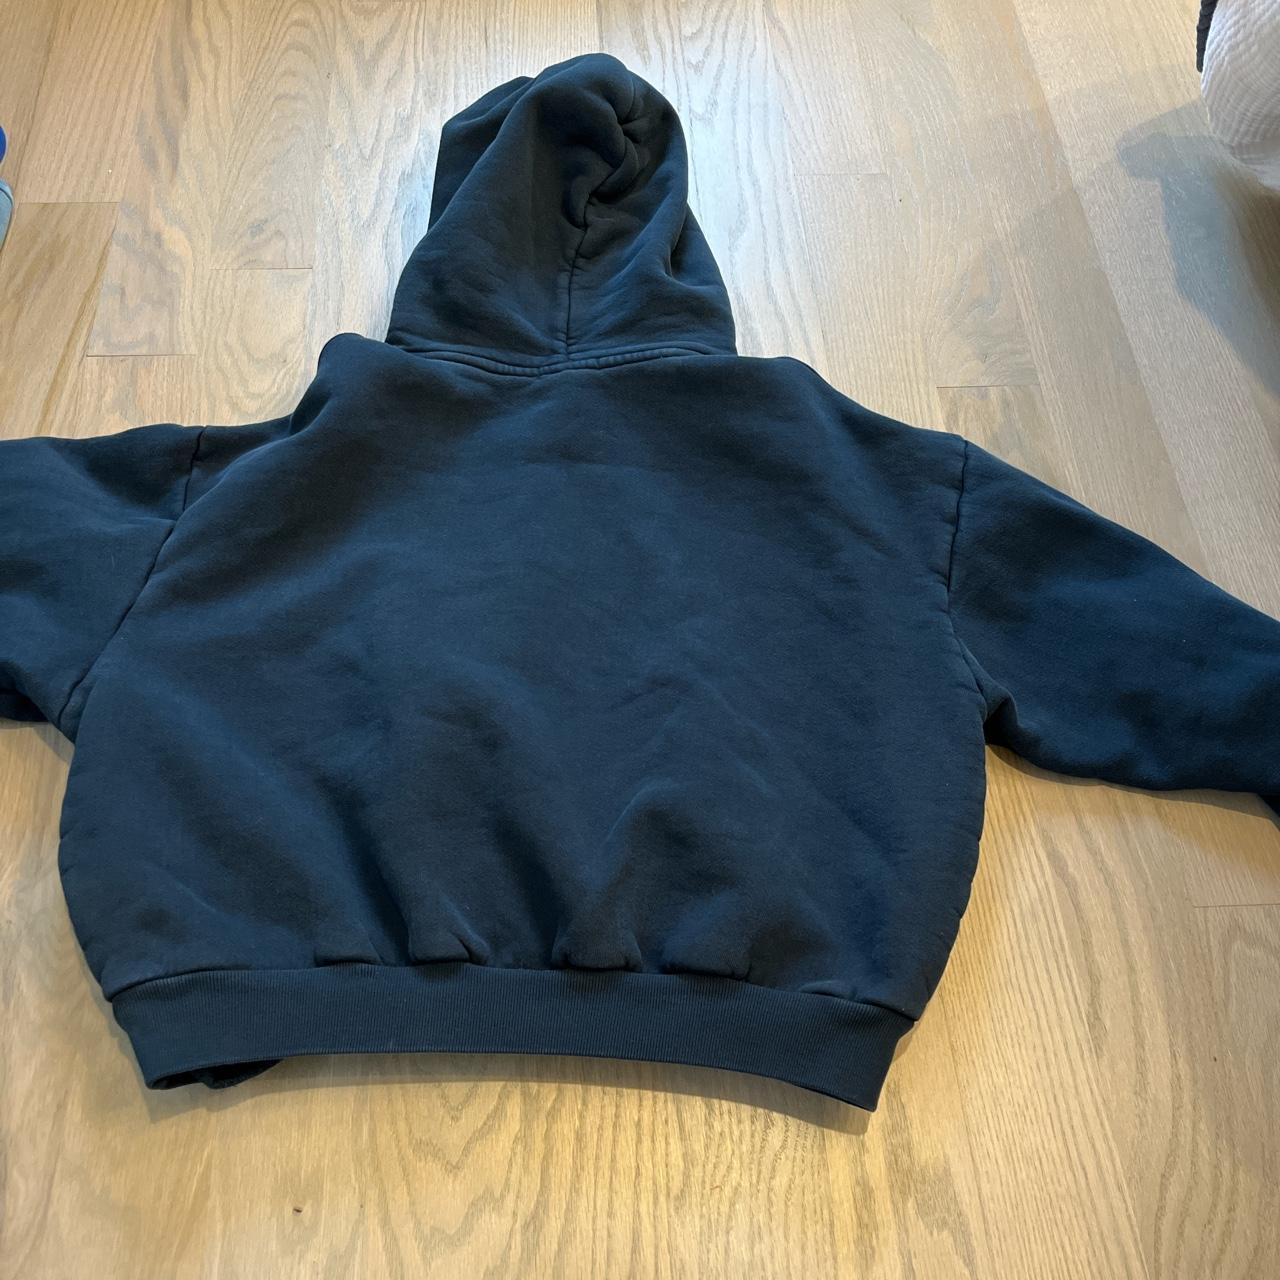 LIMITED EDITION MADHAPPY OUTDOORS HOODIE - Depop